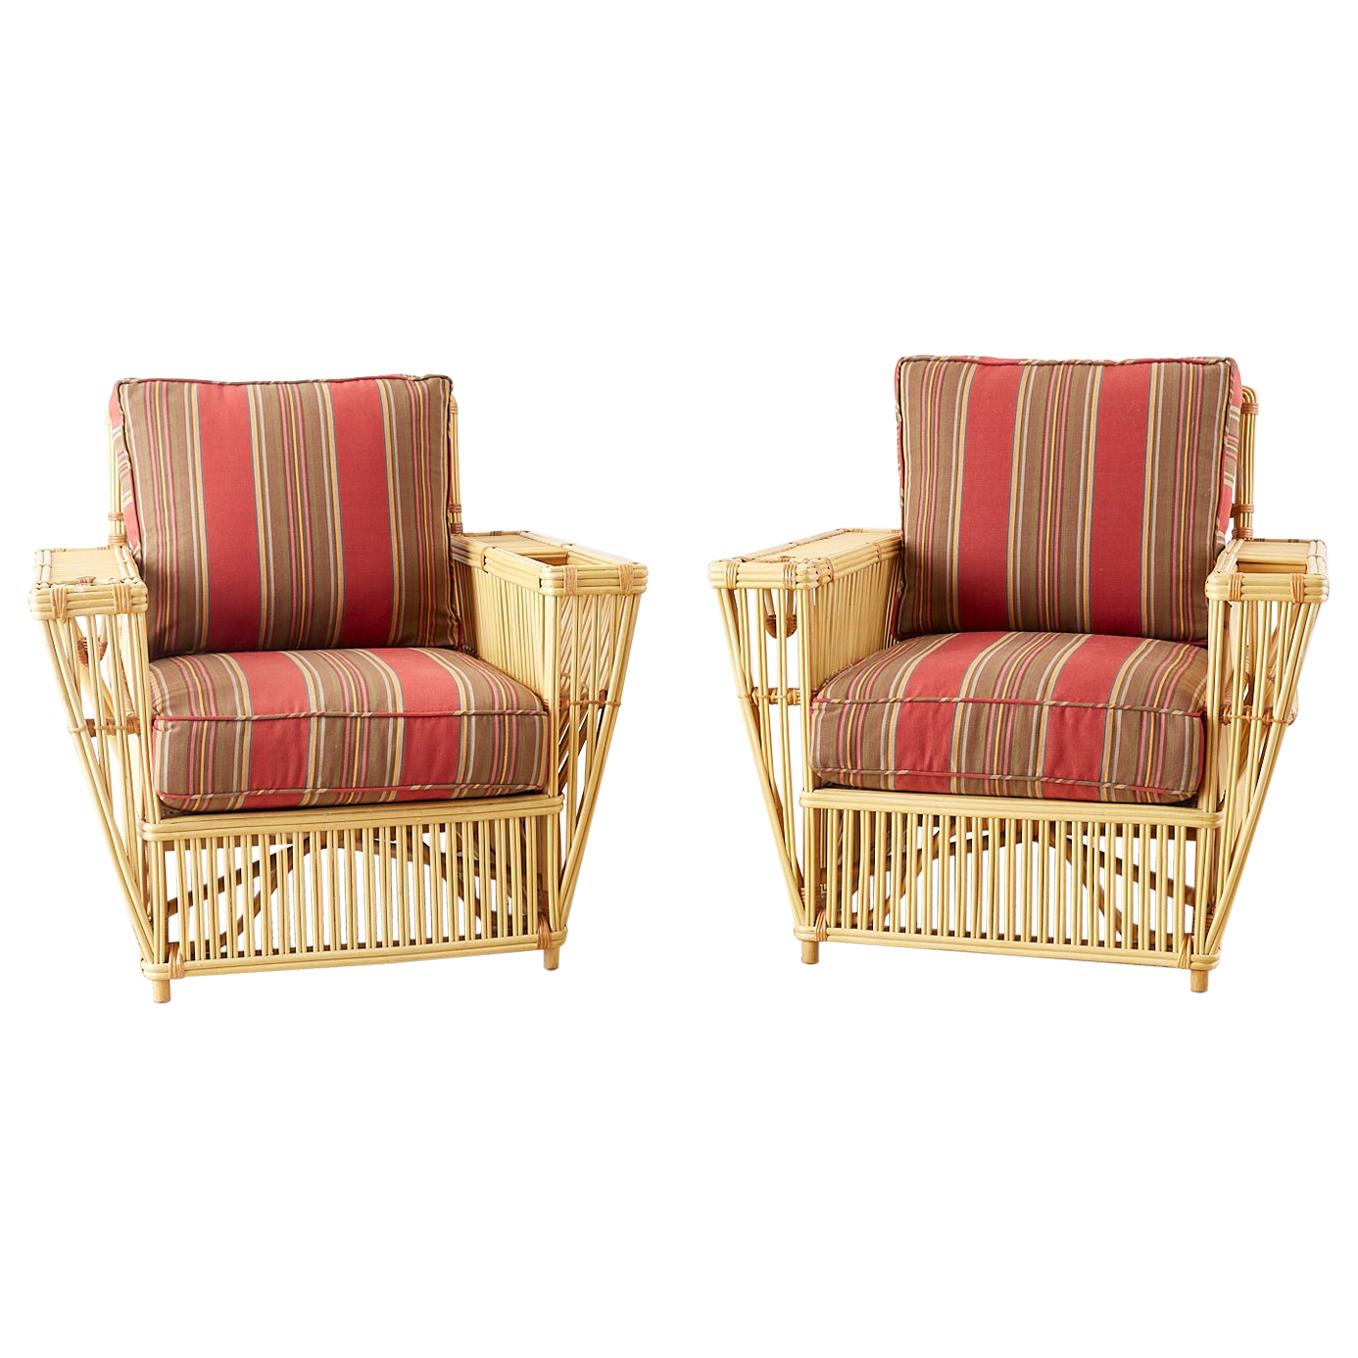 Fantastic pair of art deco style President's armchairs or lounge chairs made by Bielecky Brothers New York. These famous chairs got their name from use on presidential yachts from the early 20th century. Painstakingly made by hand by third